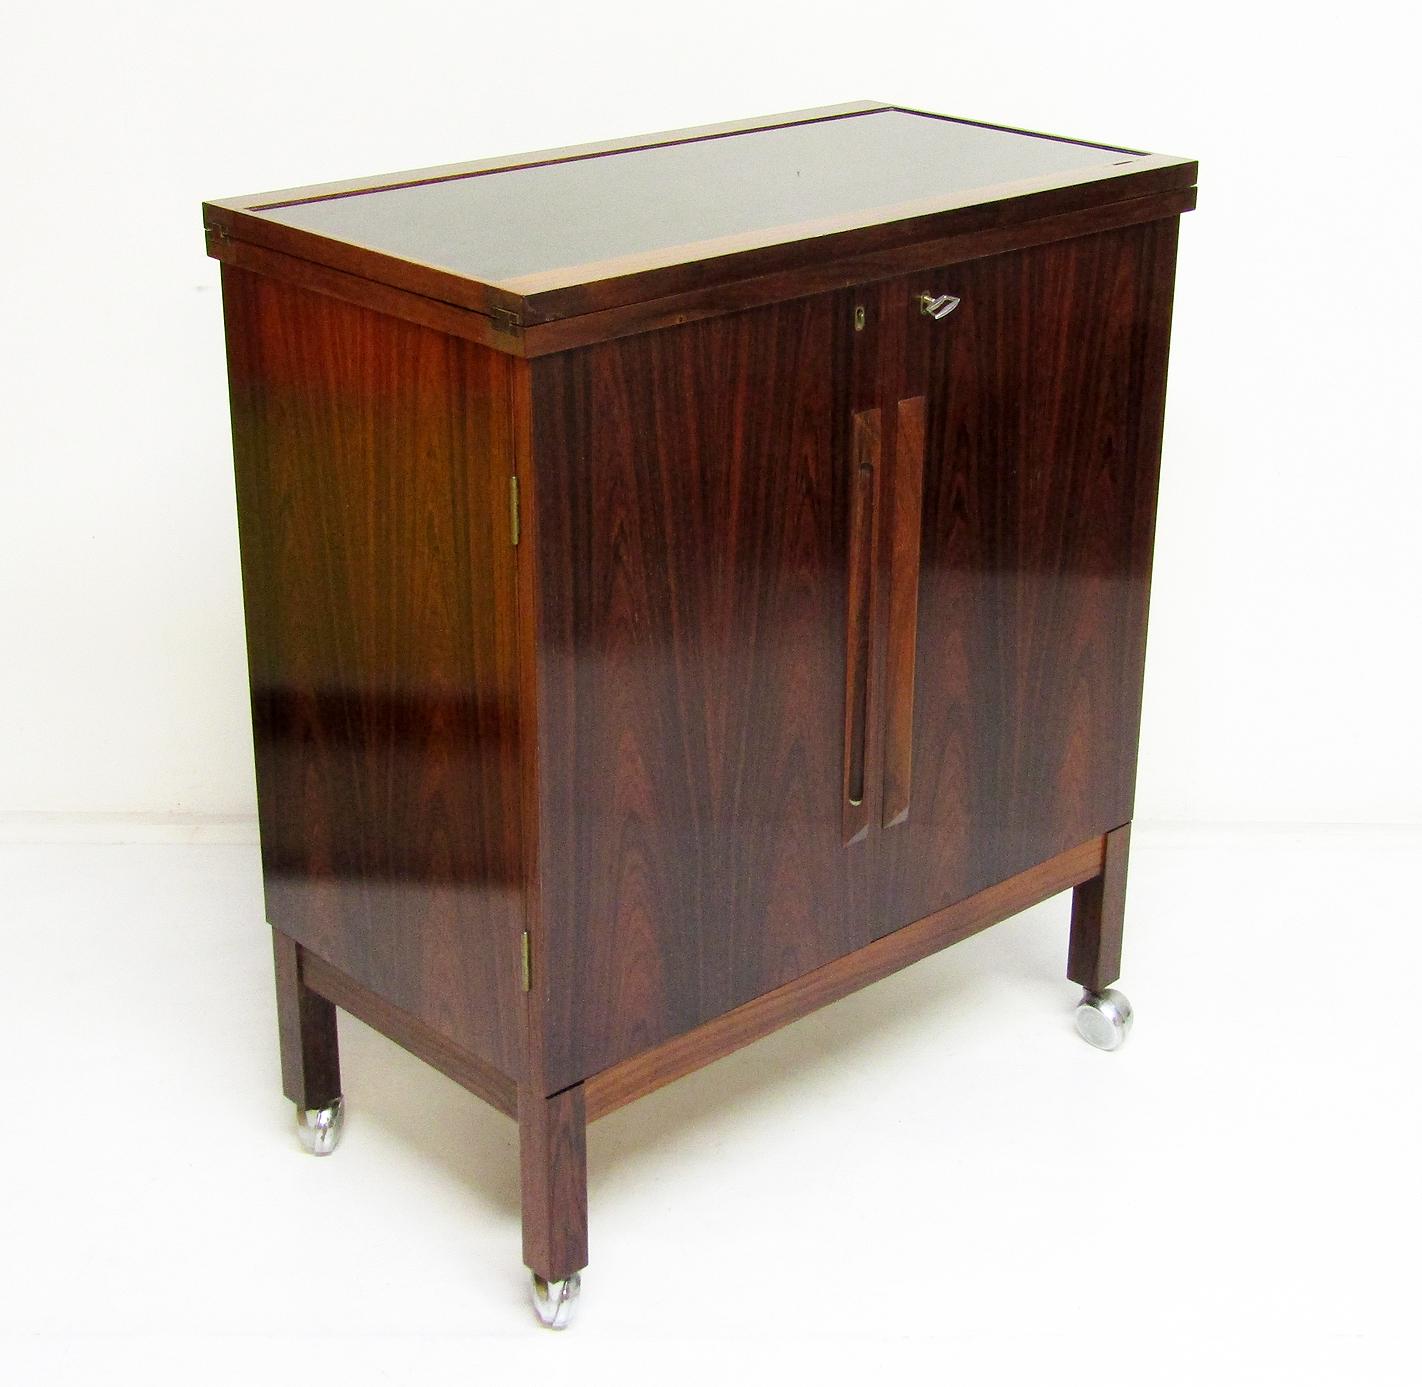 A 1960s Norwegian rosewood metamorphic dry bar cabinet by Torbjorn Afdal for Bruksbo.

In Rio rosewood with brass detail and black melamine surface, this compact drinks cabinet transforms into a full size bar. 

It can be used in its compact